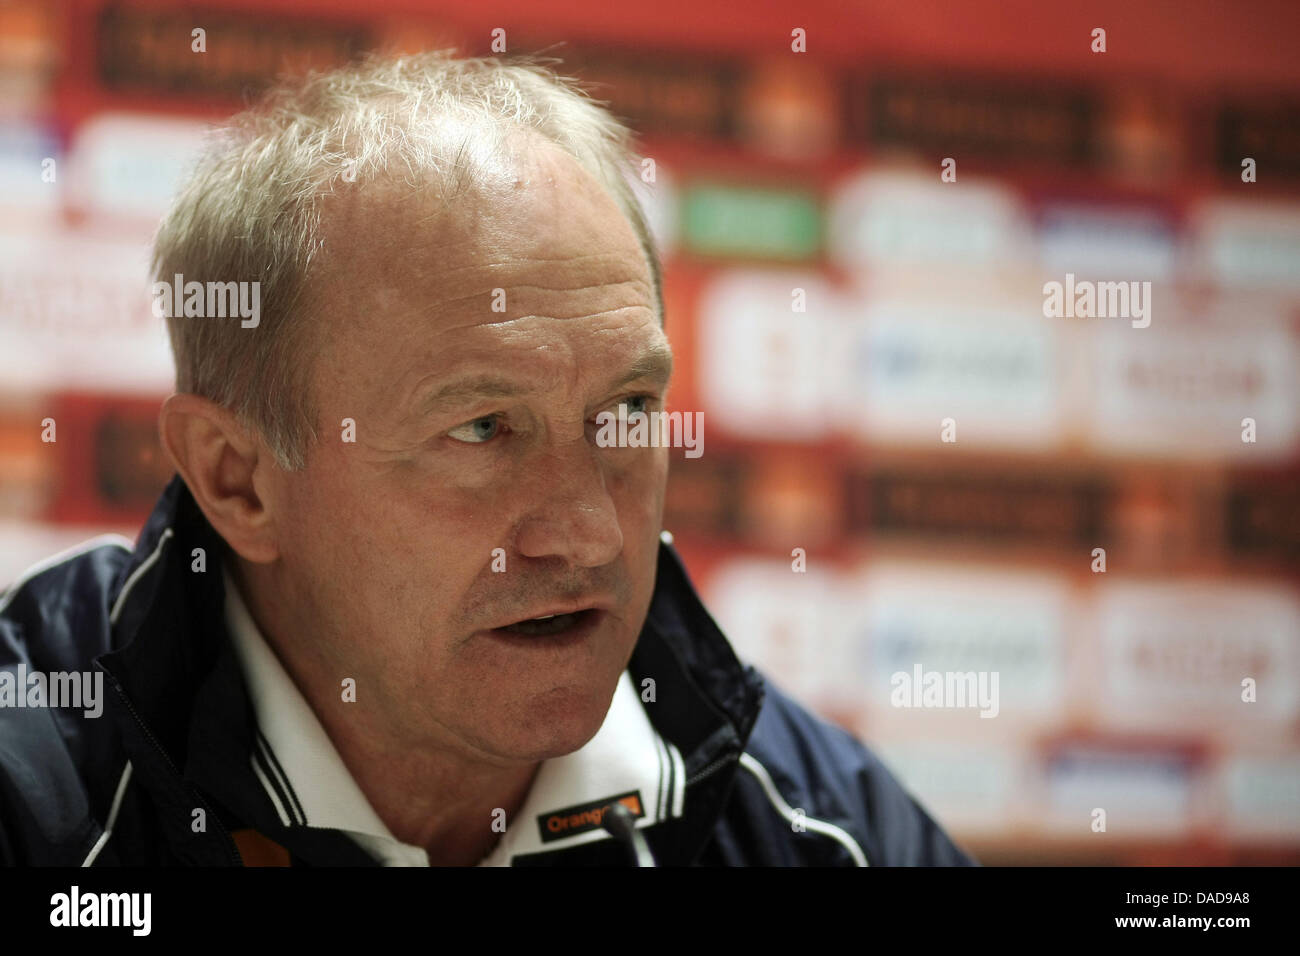 Polands' coach Franciszek Smuda seen at a press conference after the international friendly soccer match between Poland and Belarus at the Brita Arena in Wiesbaden, Germany, 11 October 2011. Photo: Fredrik von Erichsen dpa/lhe Stock Photo